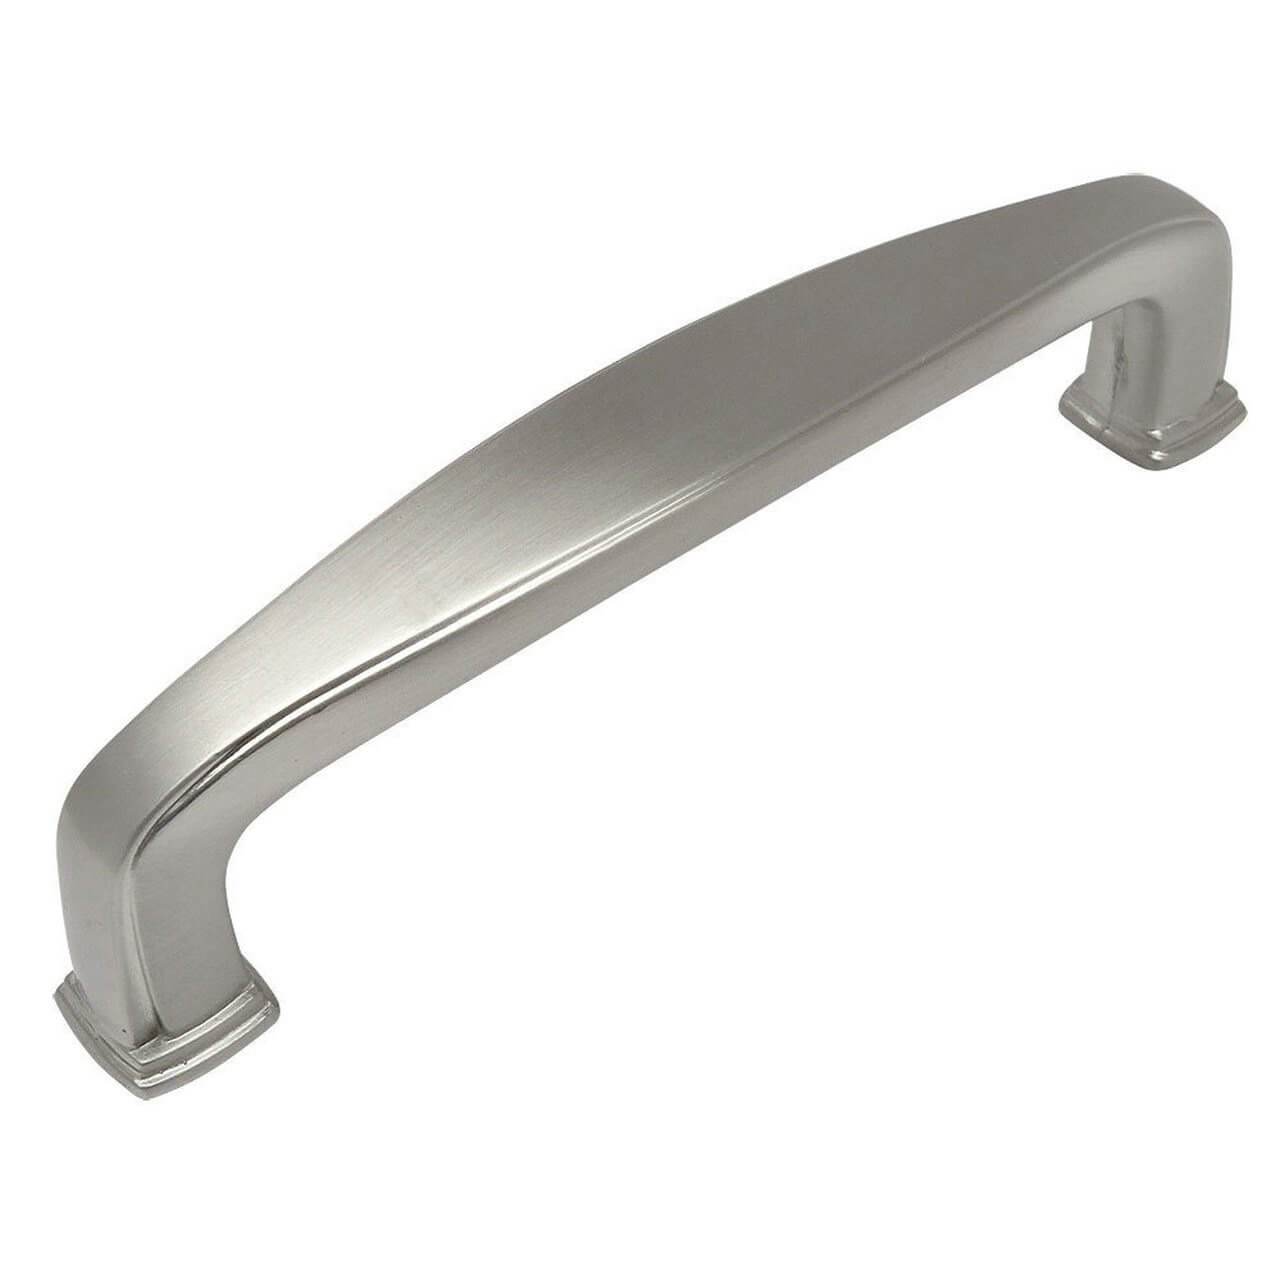 Iii and three quarters inch hole spacing cabinet pull in satin nickel stop with a broad shape at the centre